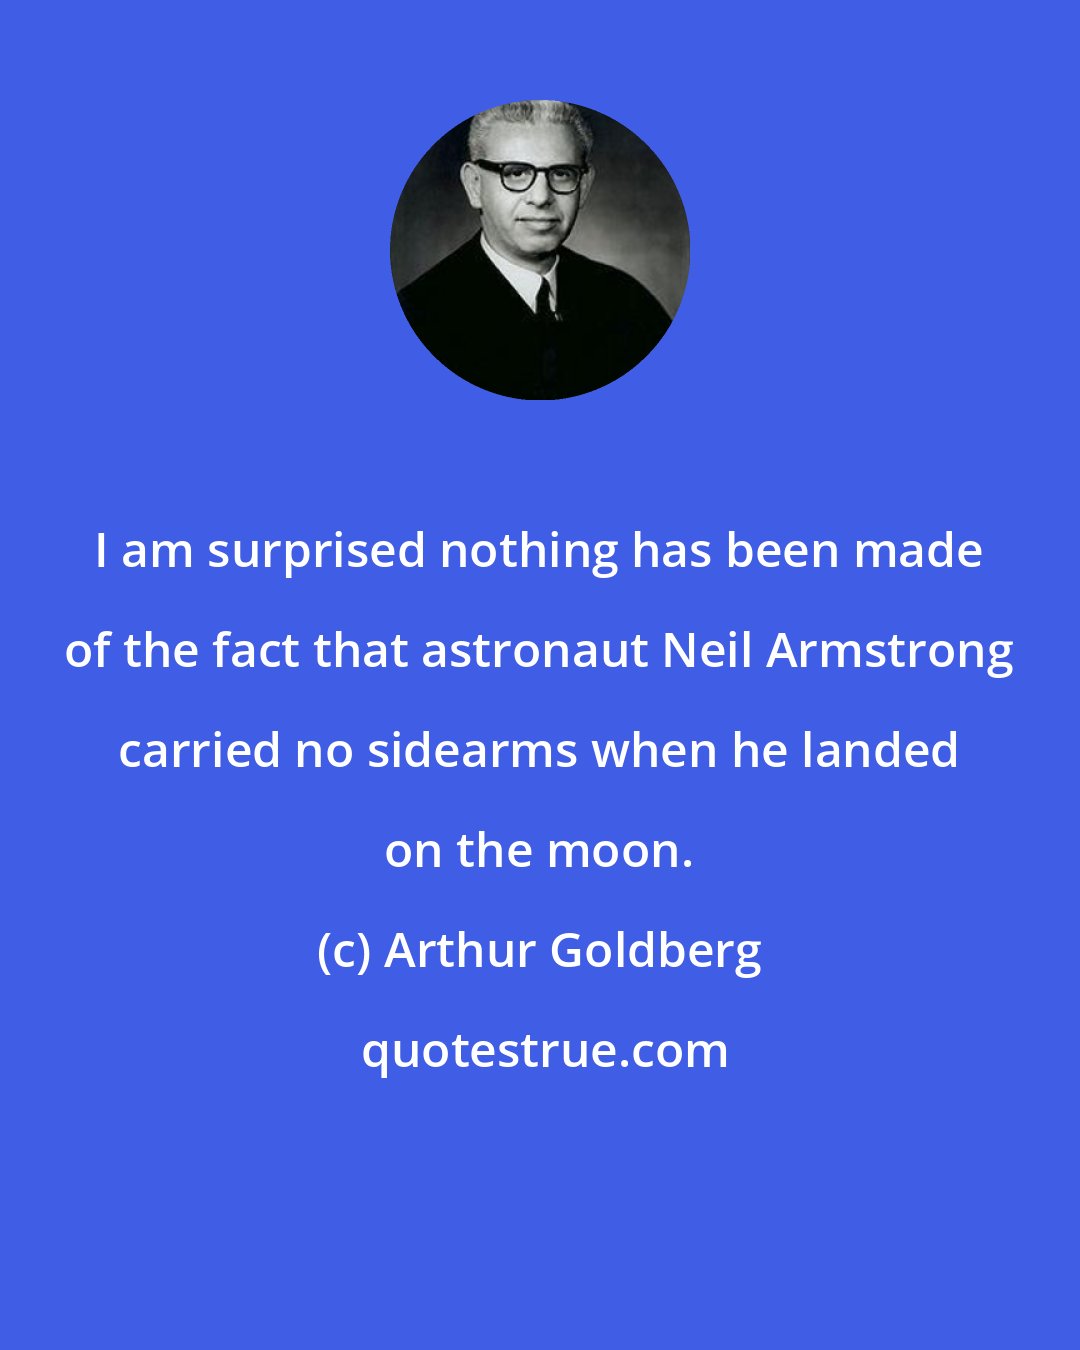 Arthur Goldberg: I am surprised nothing has been made of the fact that astronaut Neil Armstrong carried no sidearms when he landed on the moon.